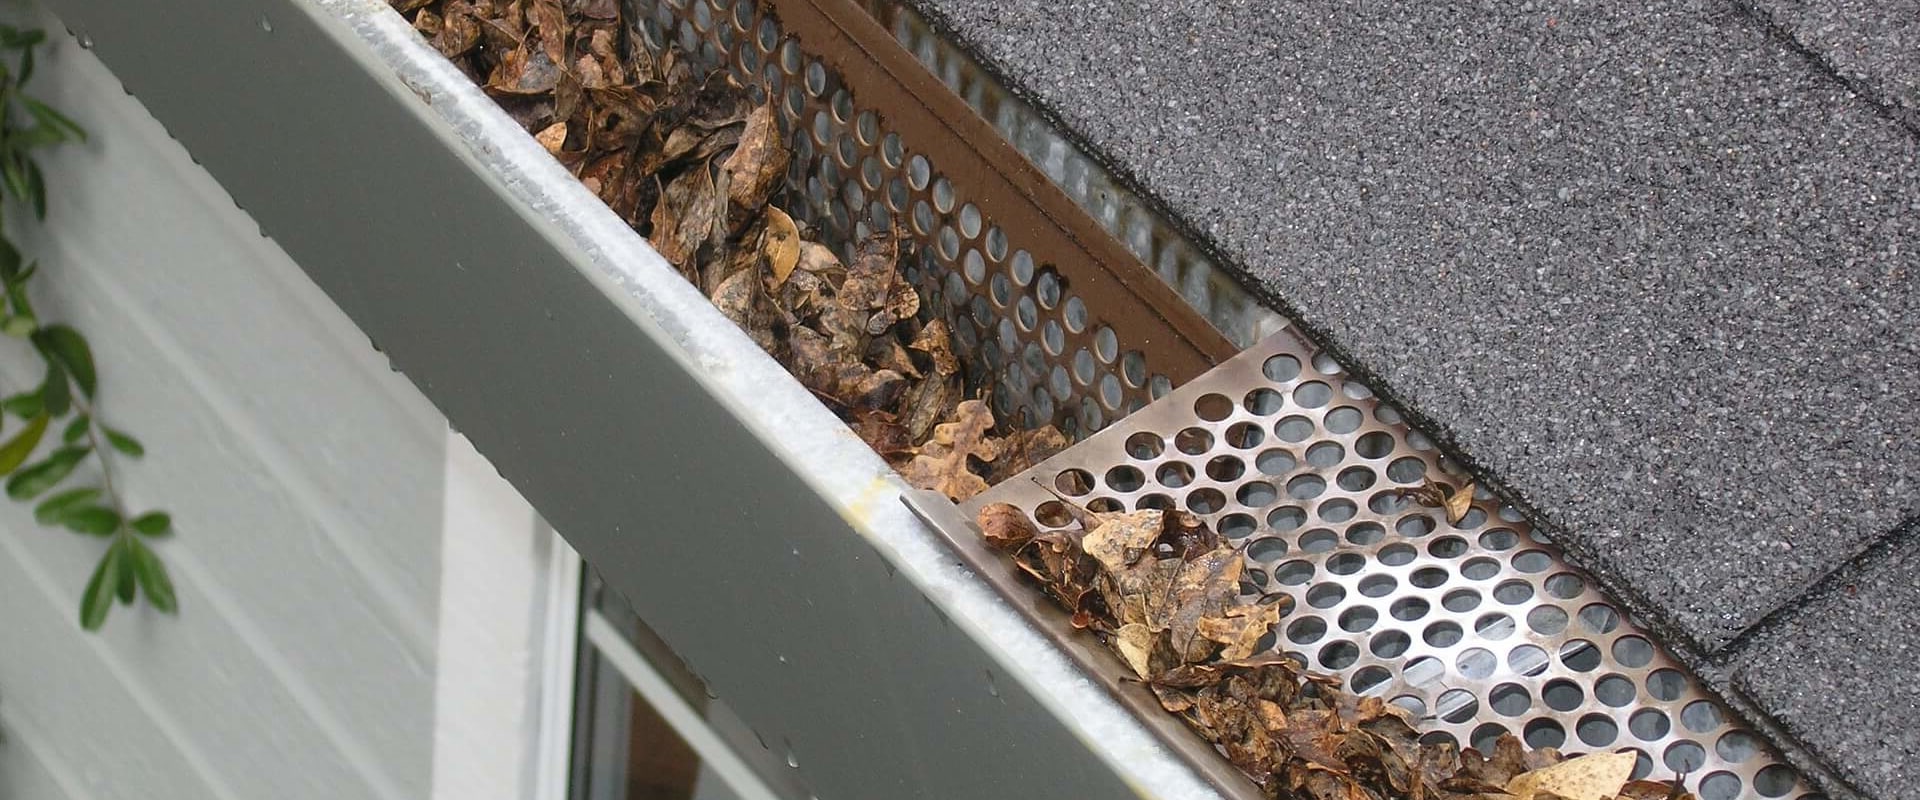 Cleaning Gutters: How to Prevent and Eliminate Bee Habitats